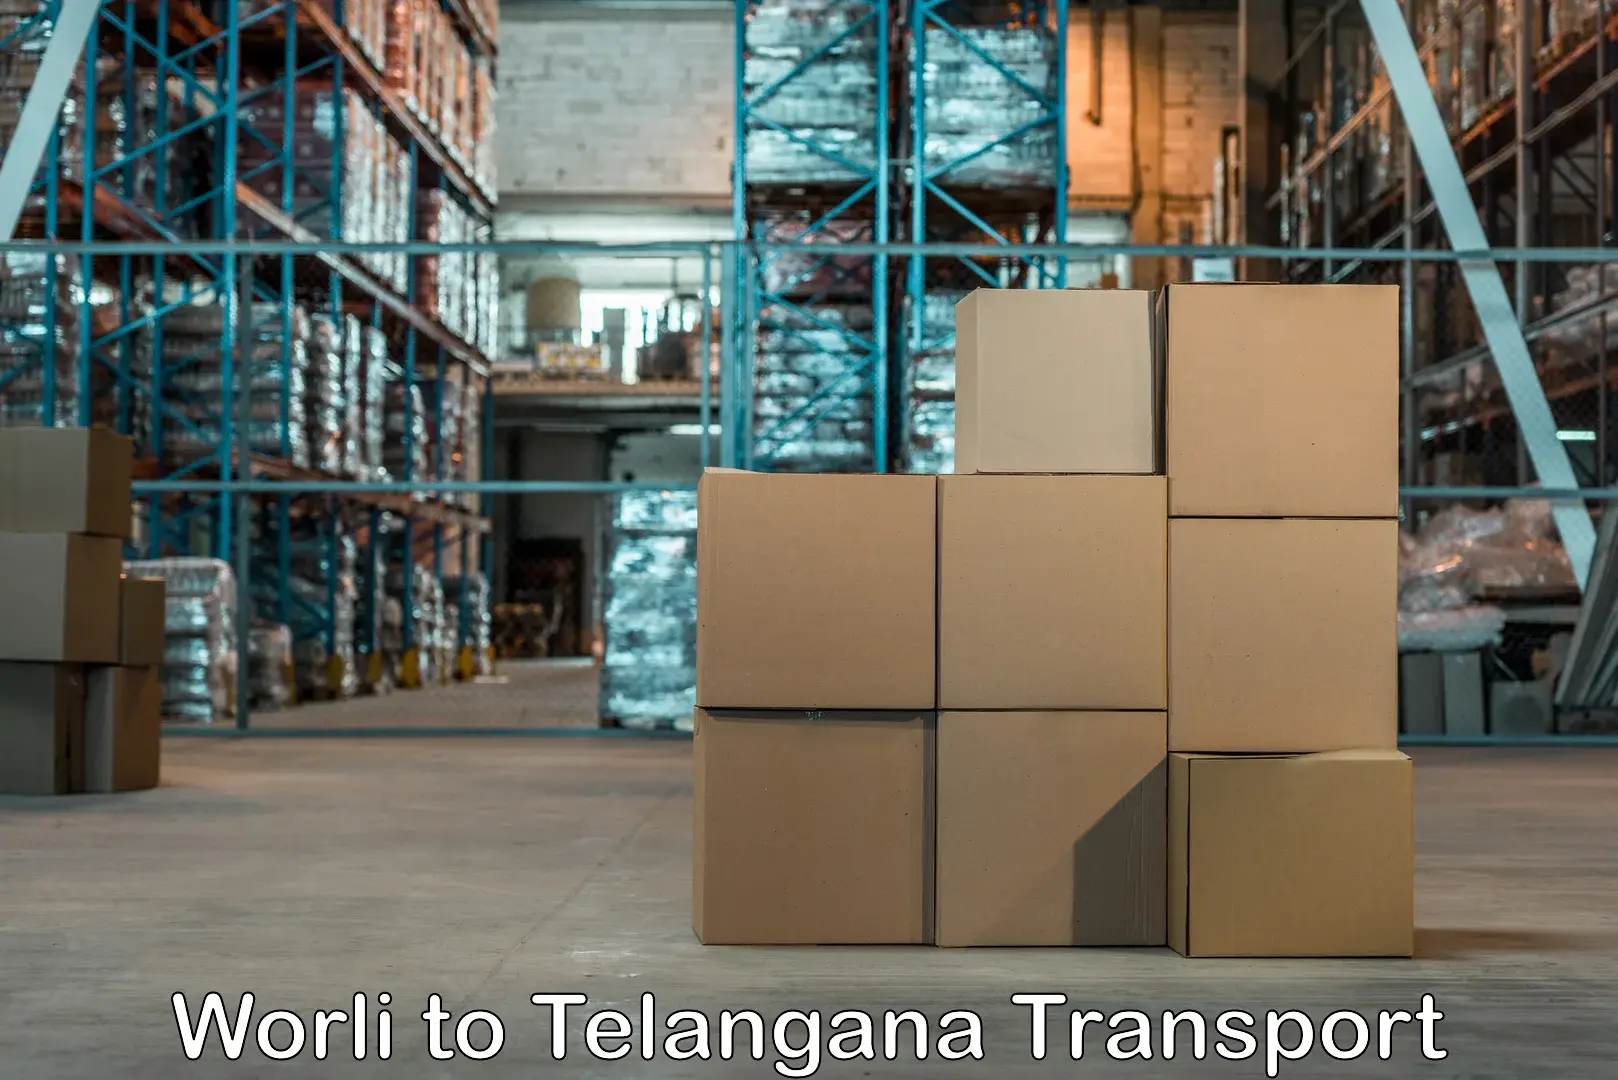 Package delivery services Worli to Telangana